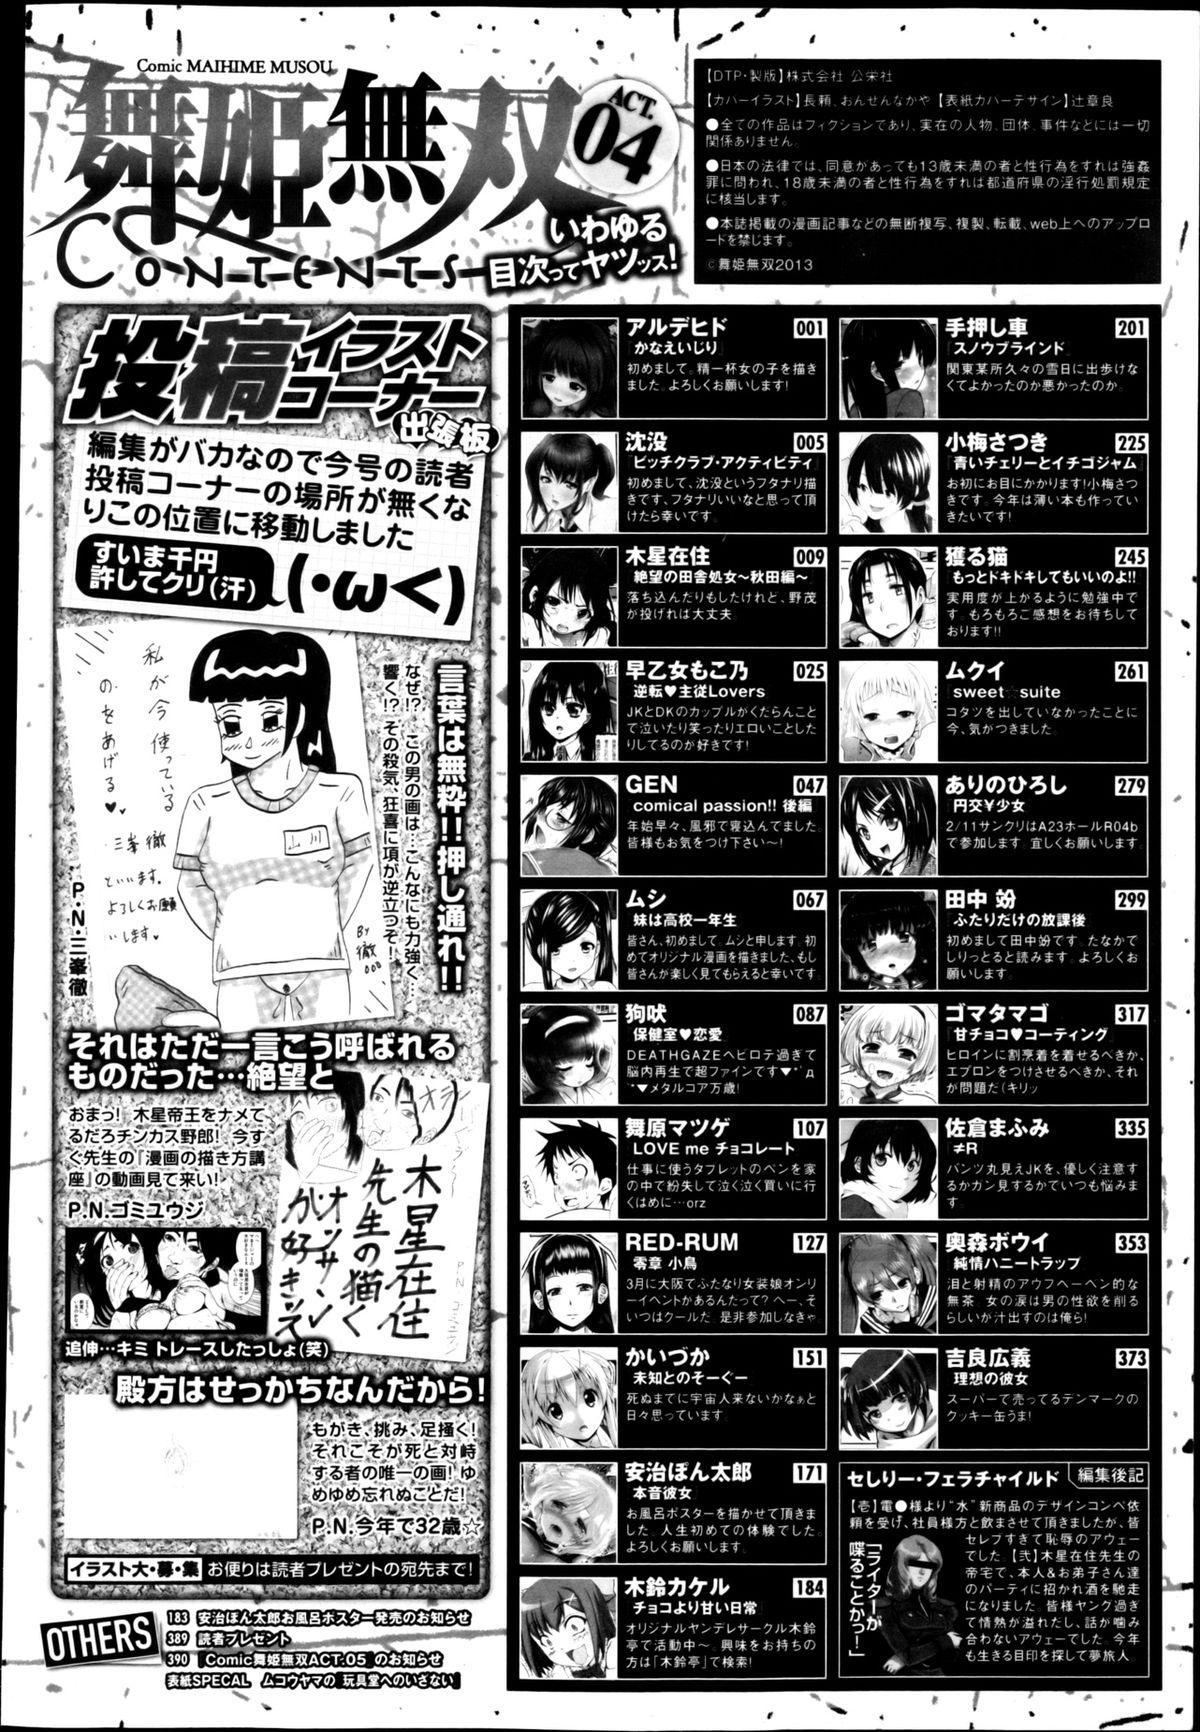 Wrestling COMIC Maihime Musou Act. 04 2013-03 Huge - Page 394